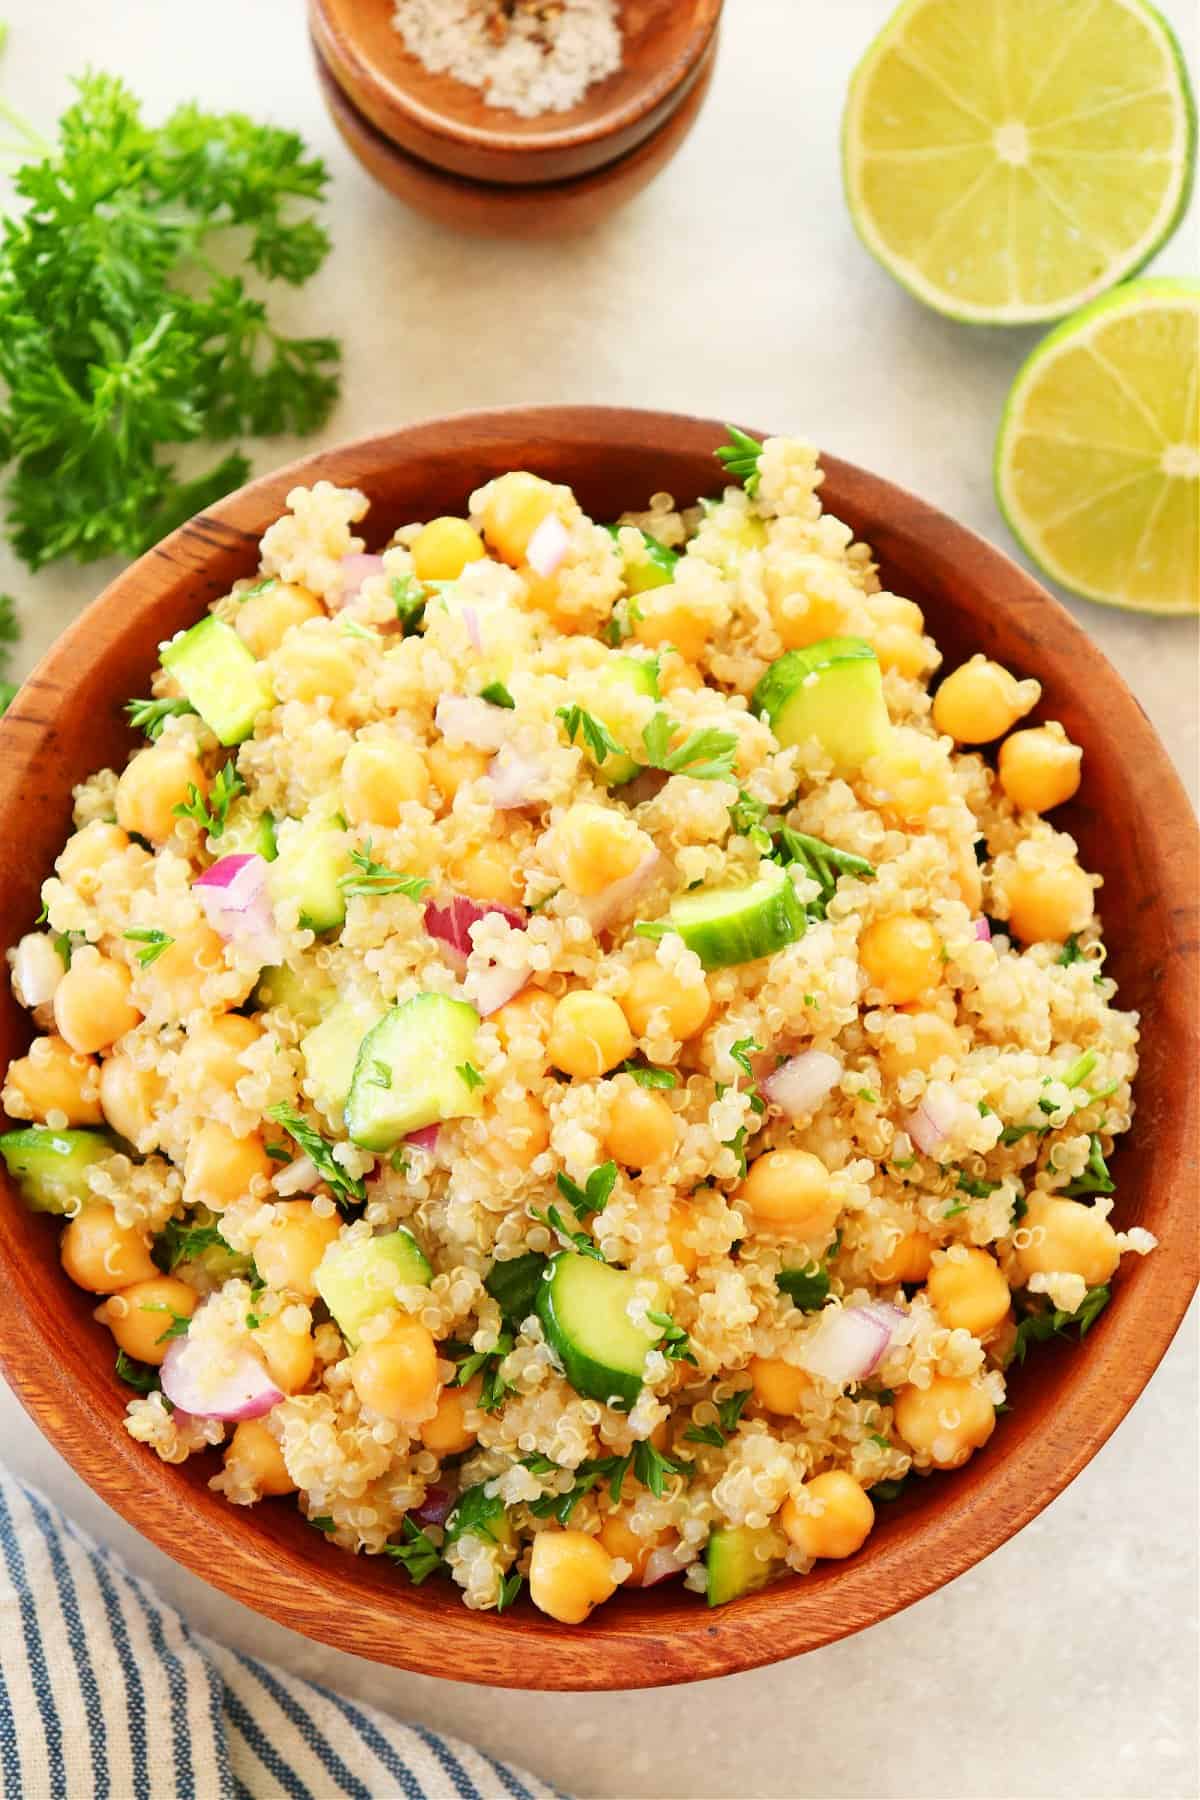 Quinoa salad with chickpeas and cucumber in a wooden bowl on cream background.